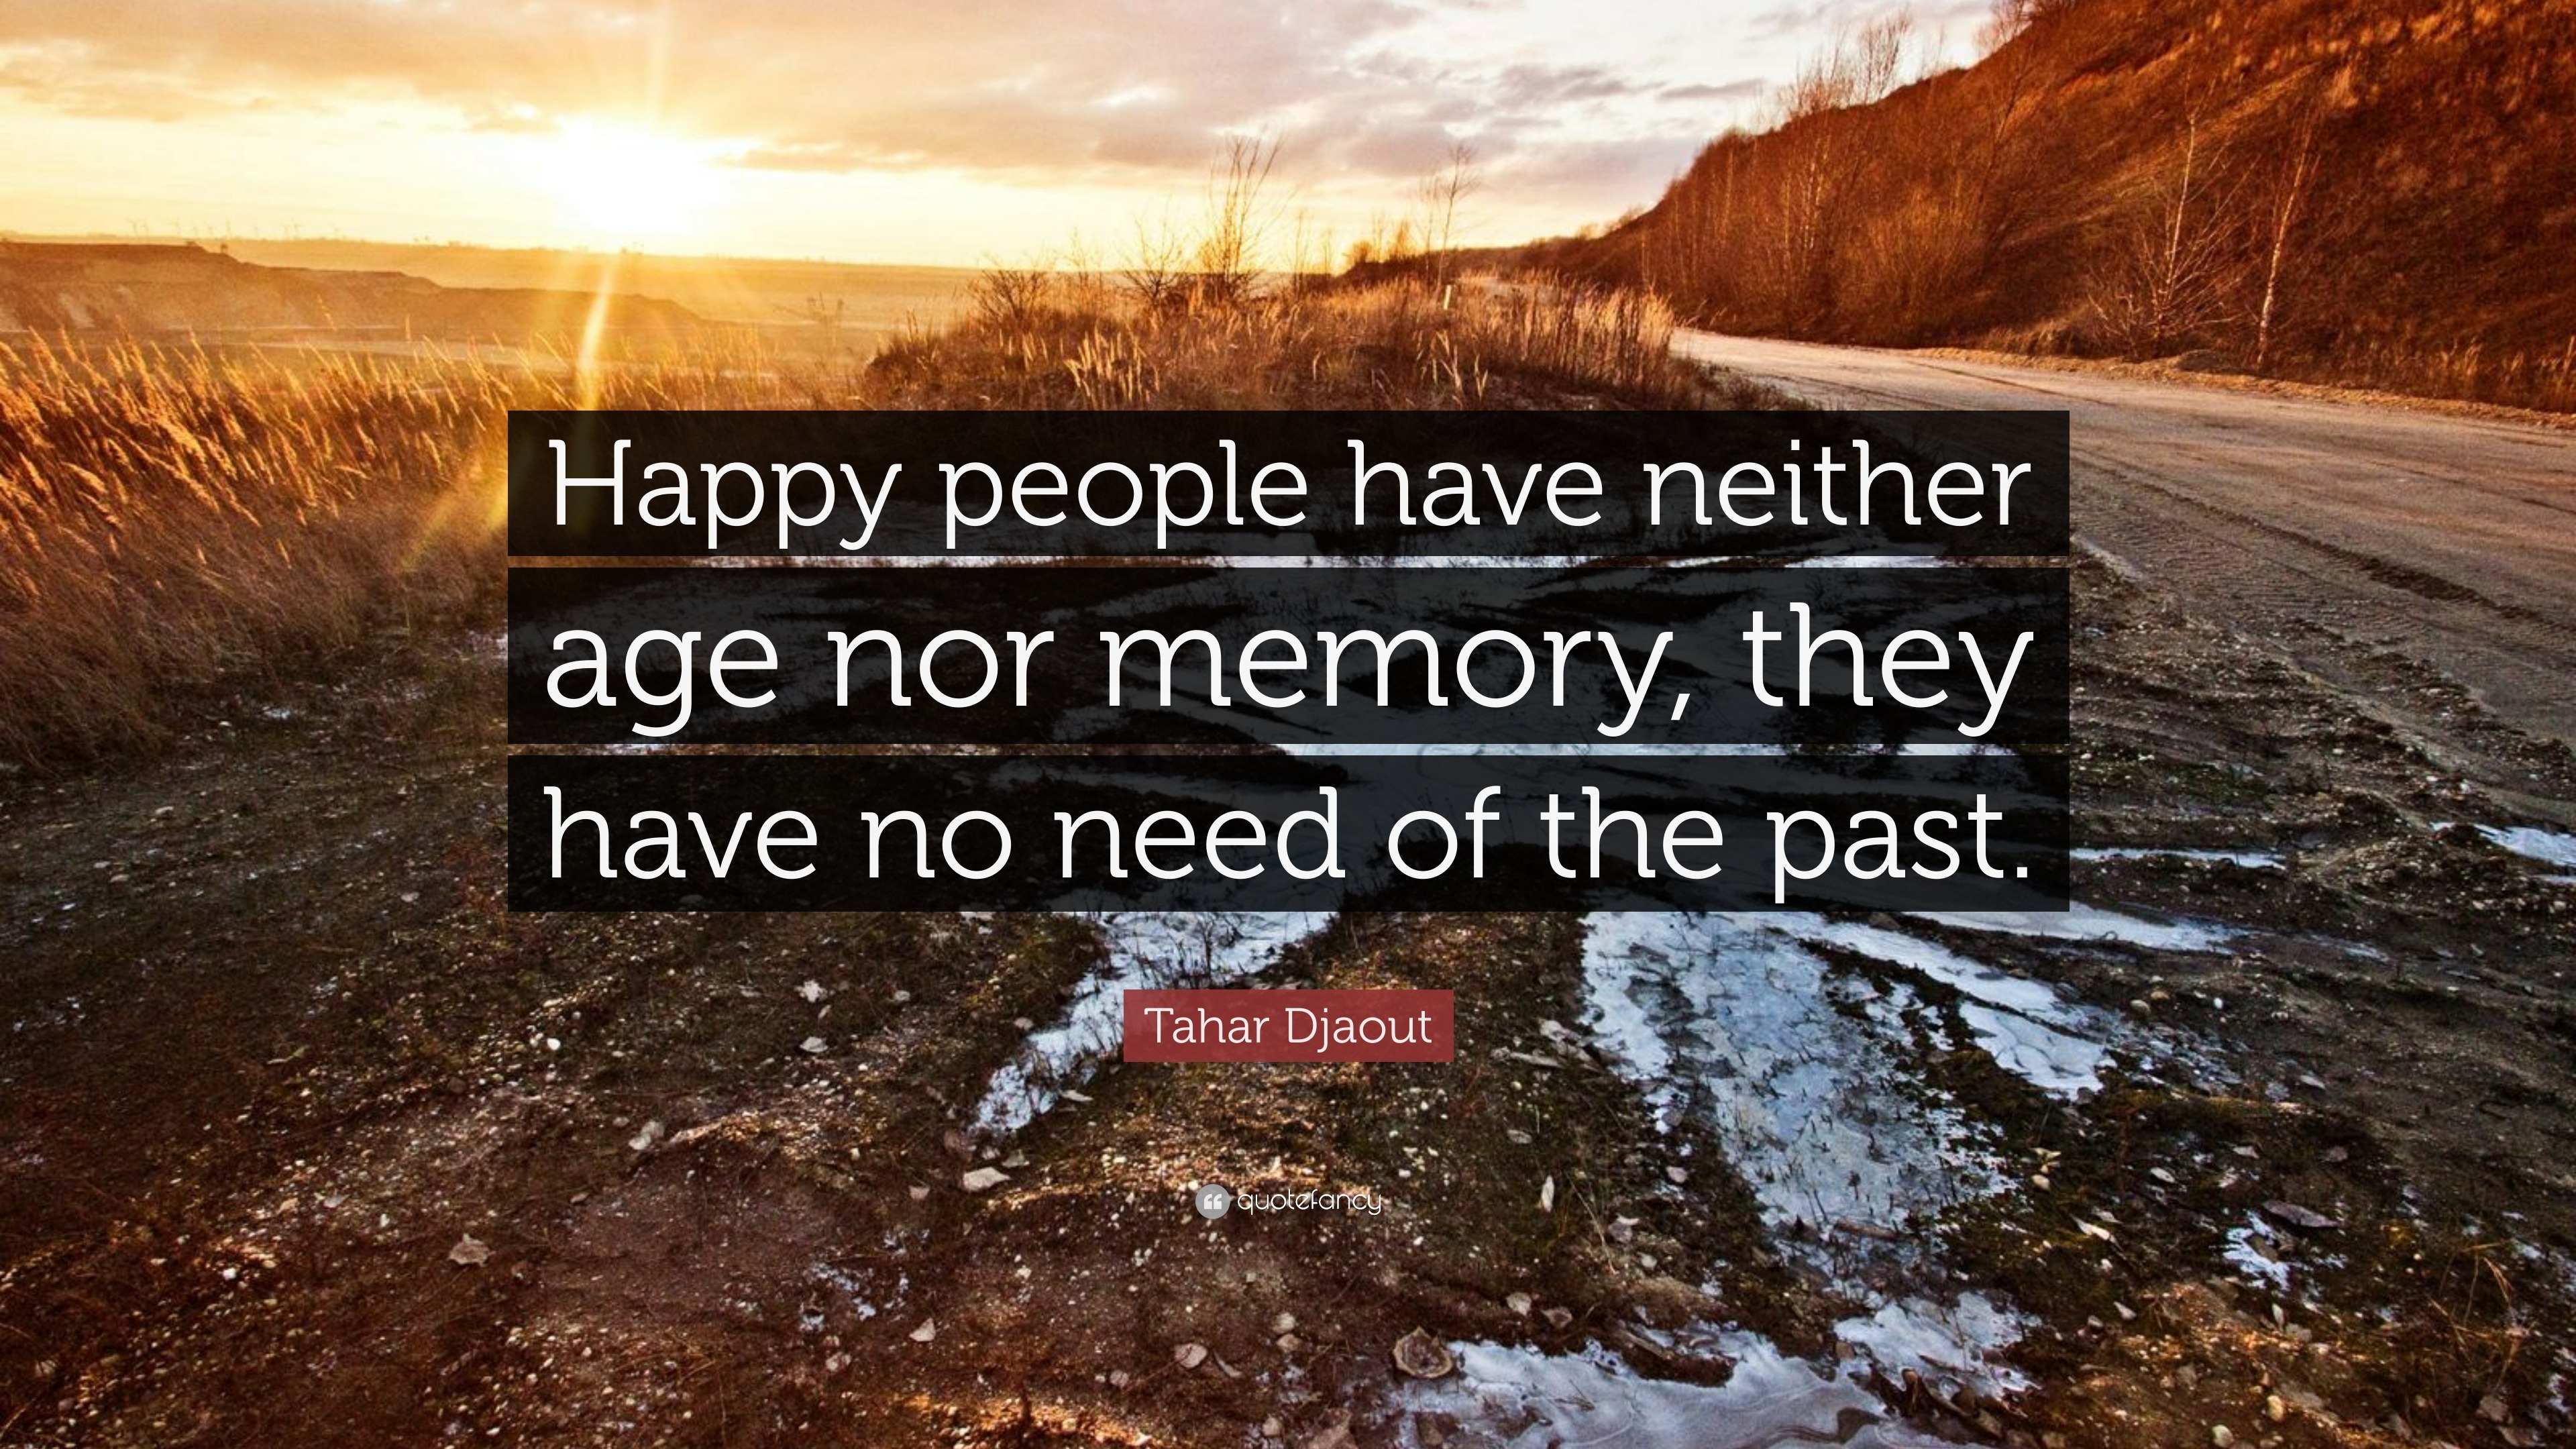 Tahar Djaout Quote: “Happy people have neither age nor memory, they ...